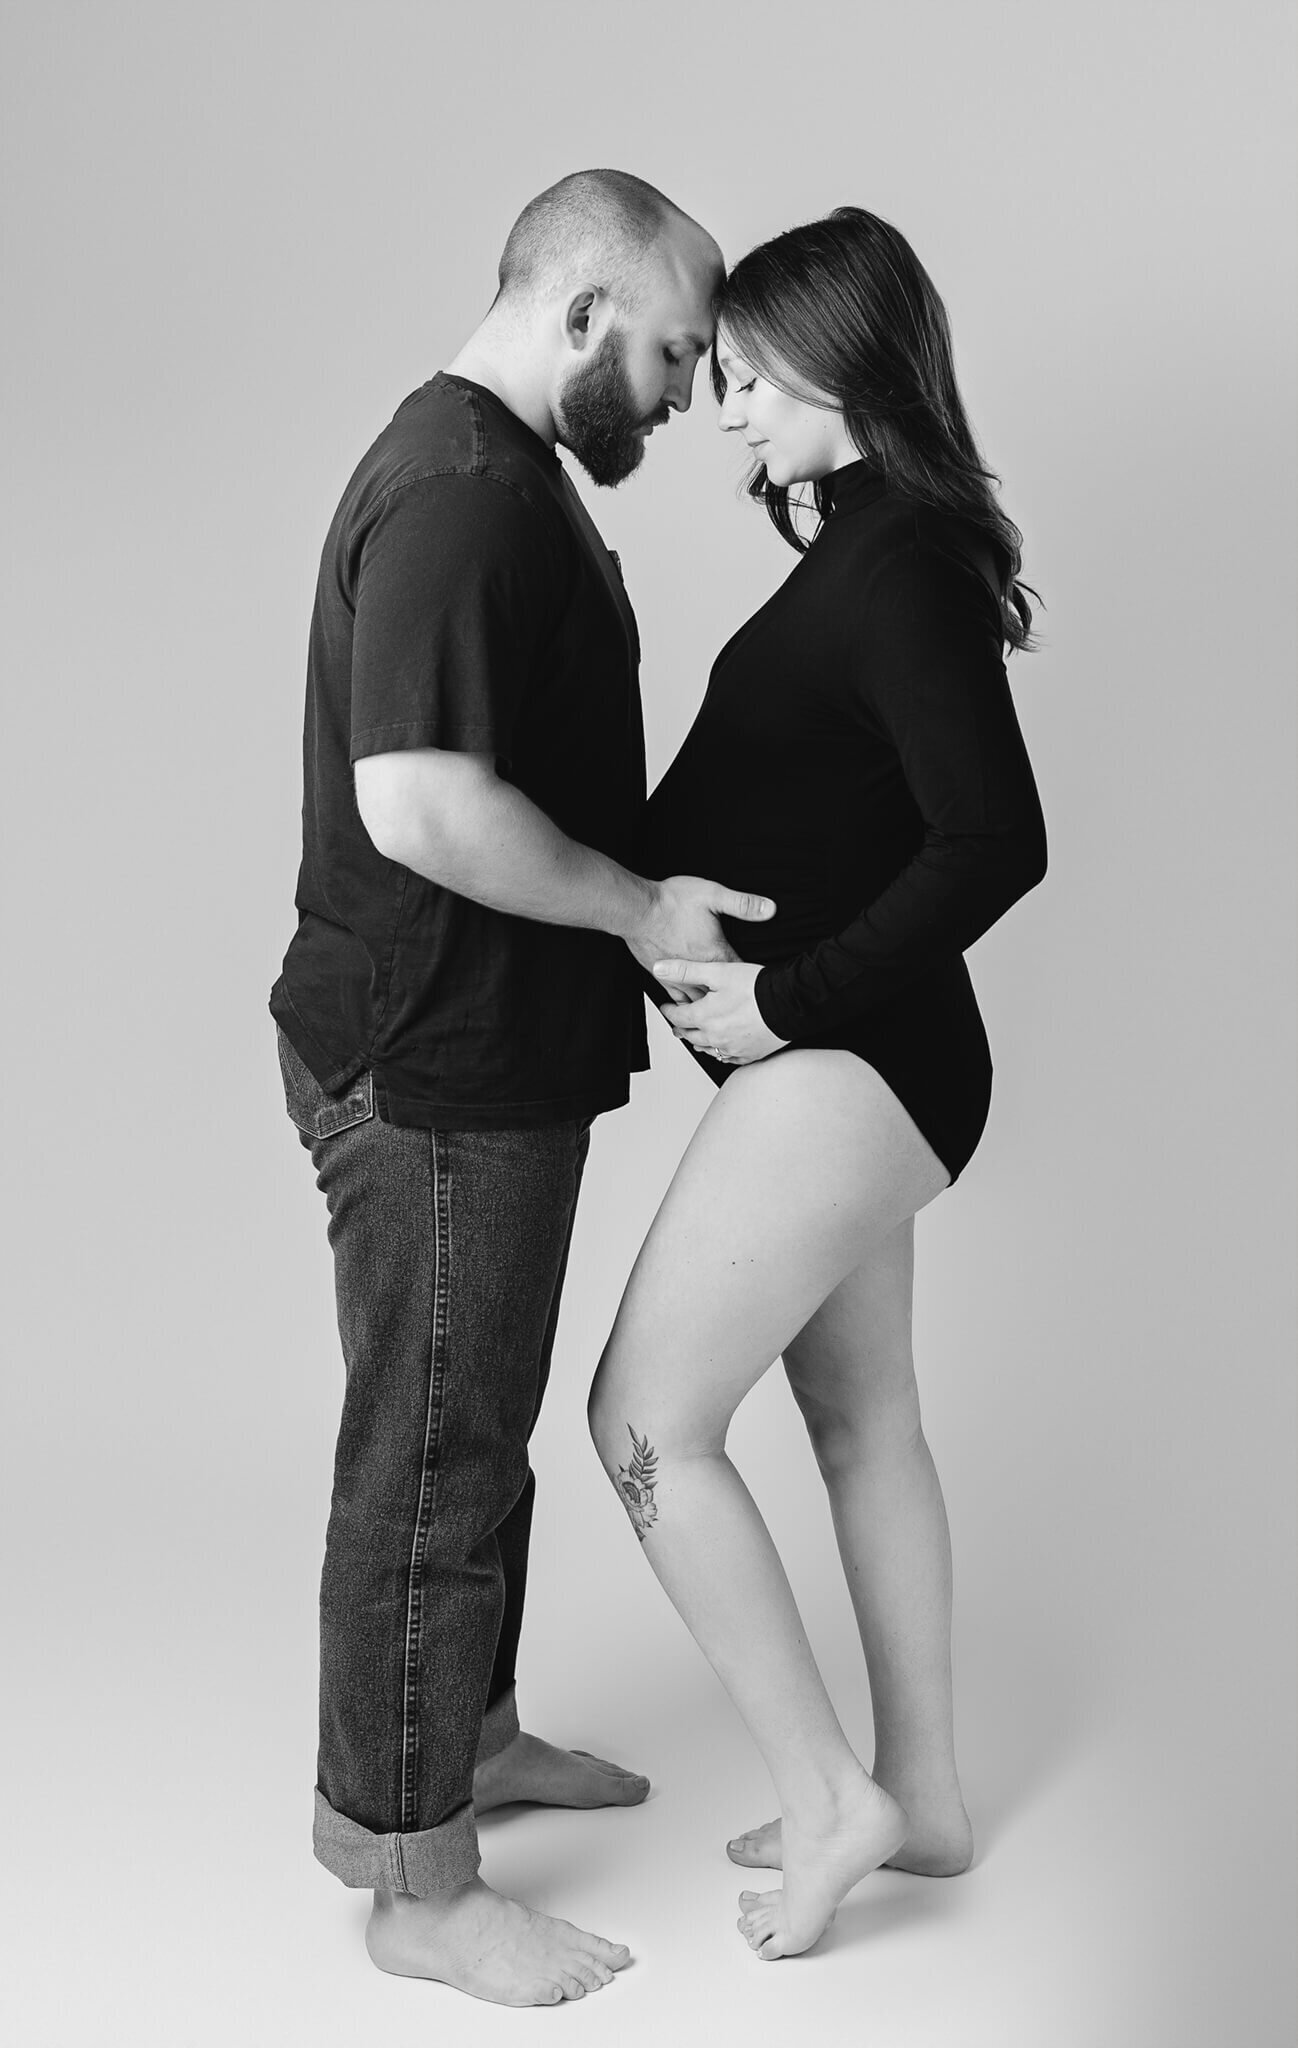 beautiful portrait of a couple expecting their first baby, he is wearing jeans and a black tshirt, she is wearing lingerie